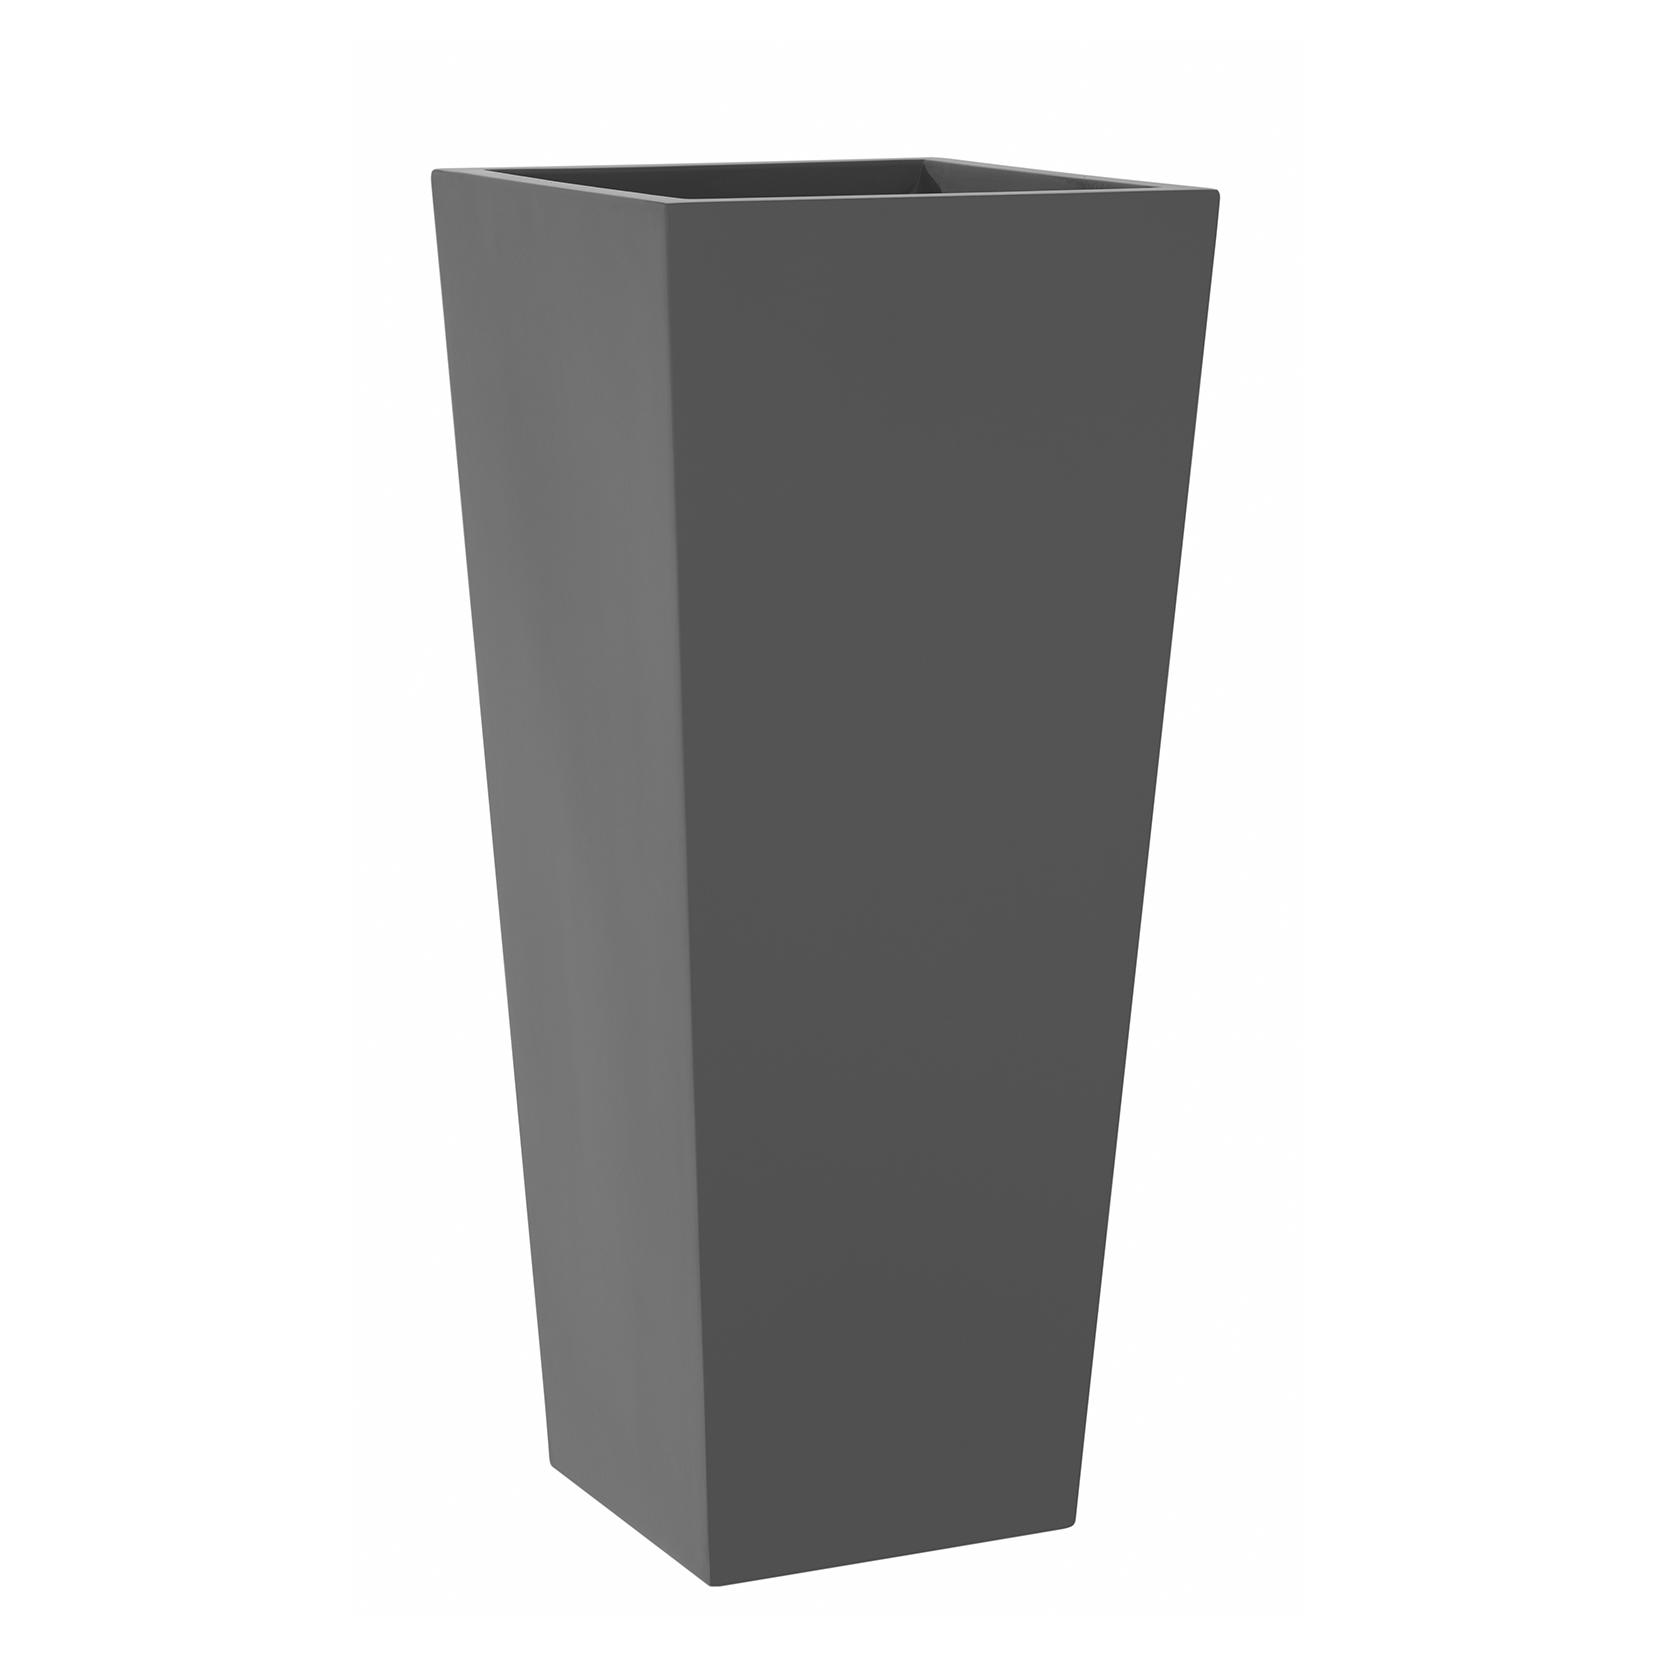 grey fibreglass tall tapered garden planter or container